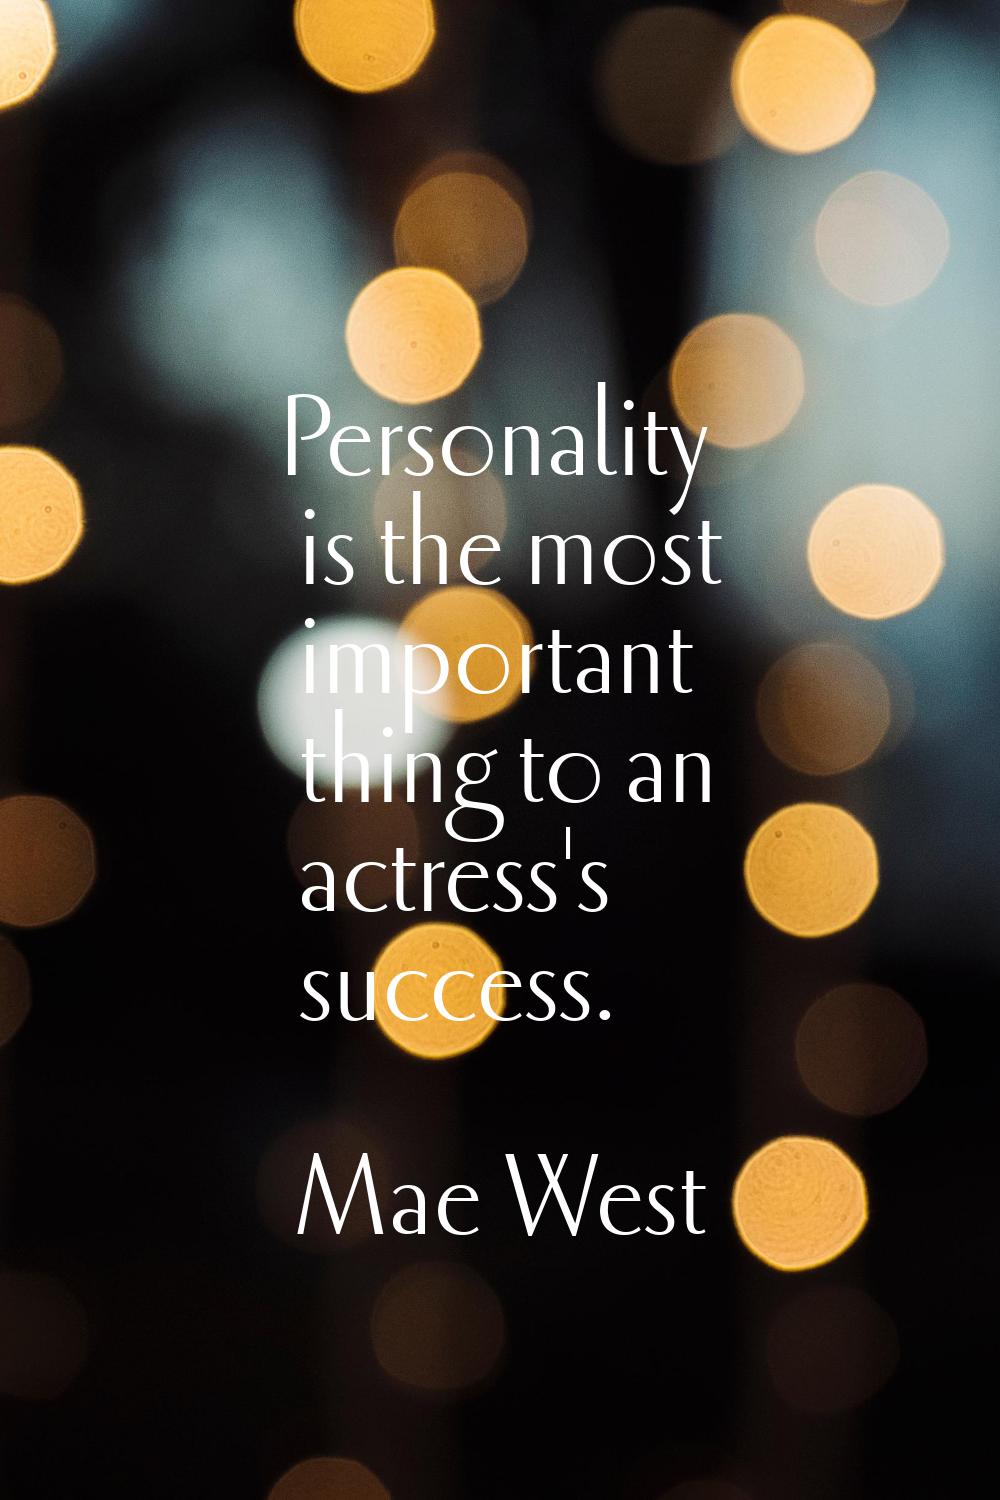 Personality is the most important thing to an actress's success.